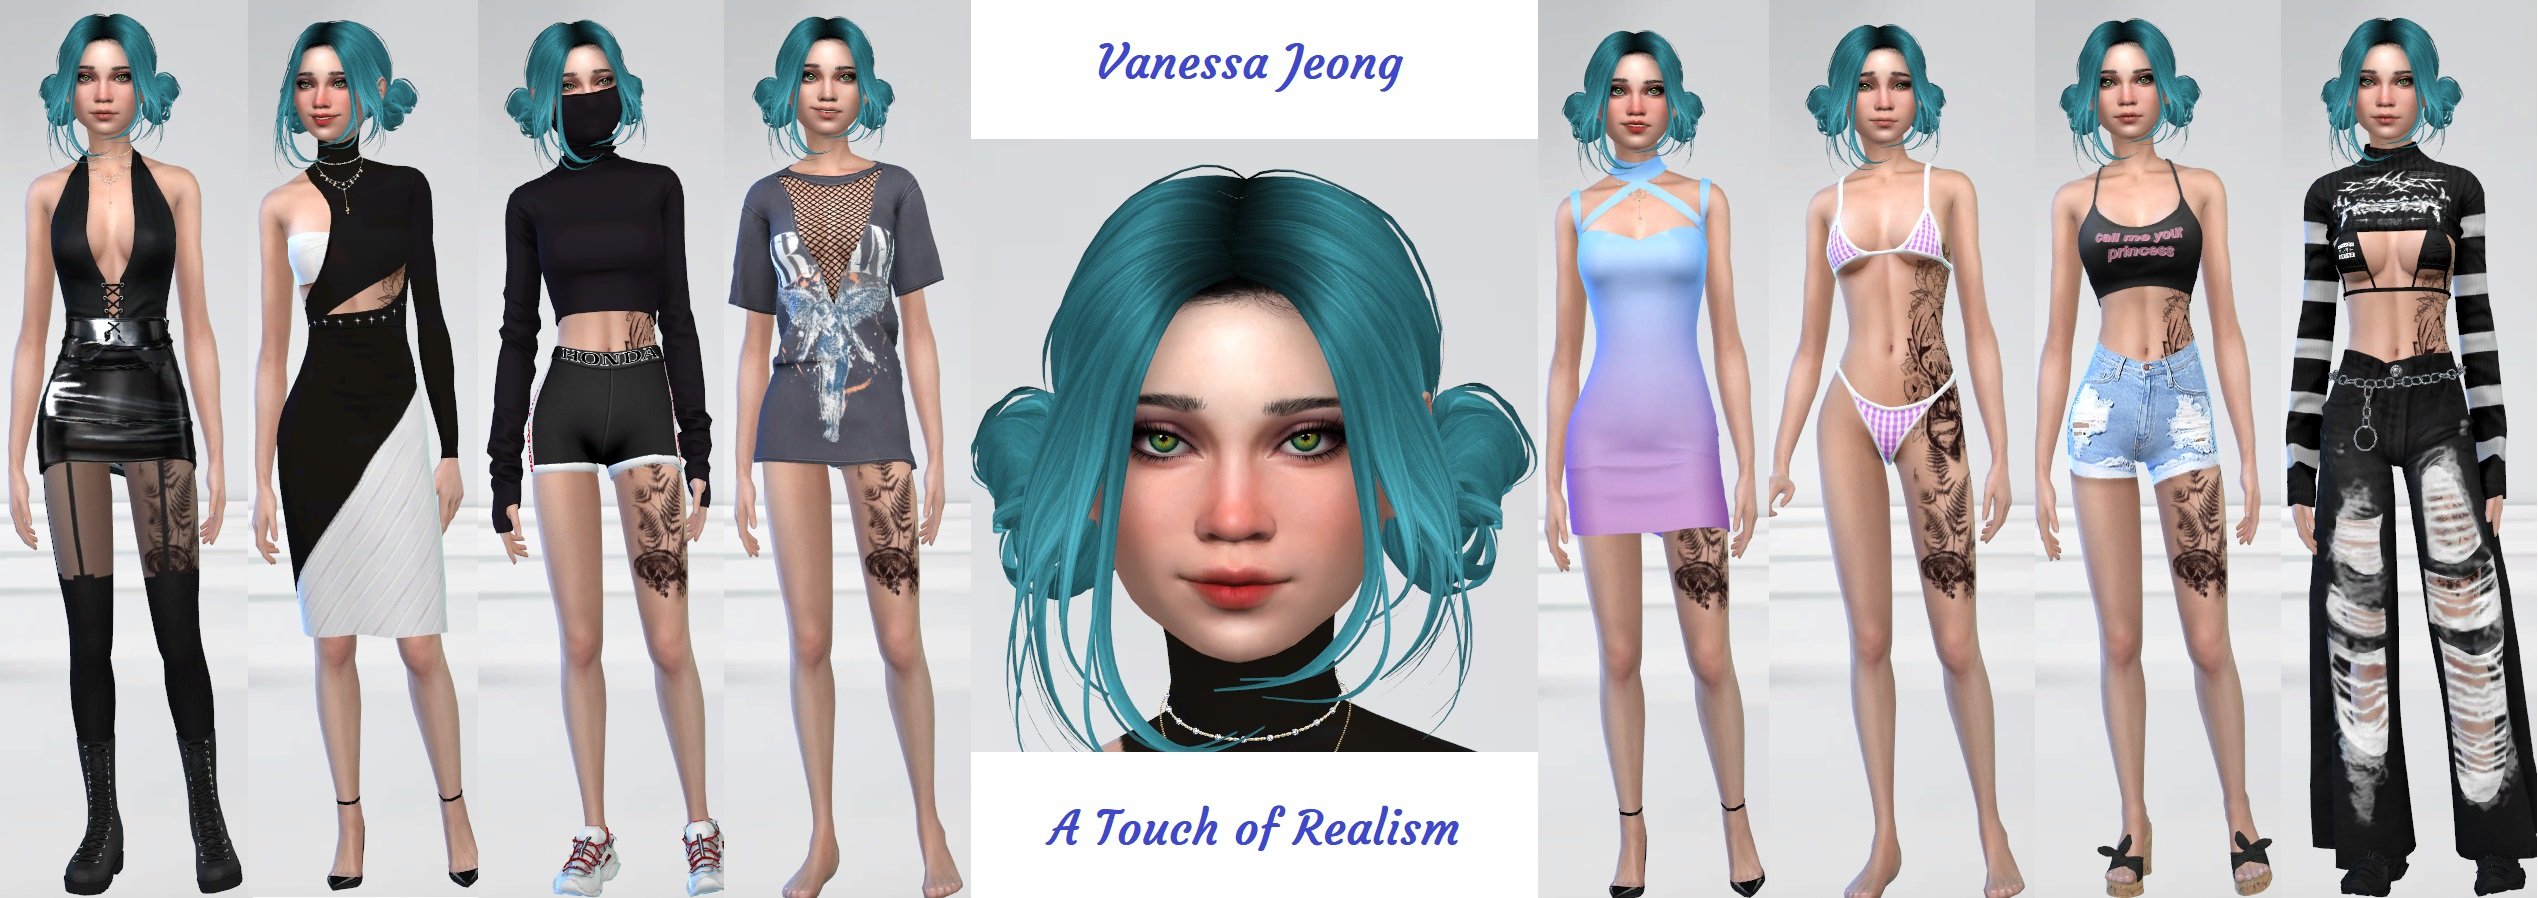 Townie Vanessa Jeong Makeover!